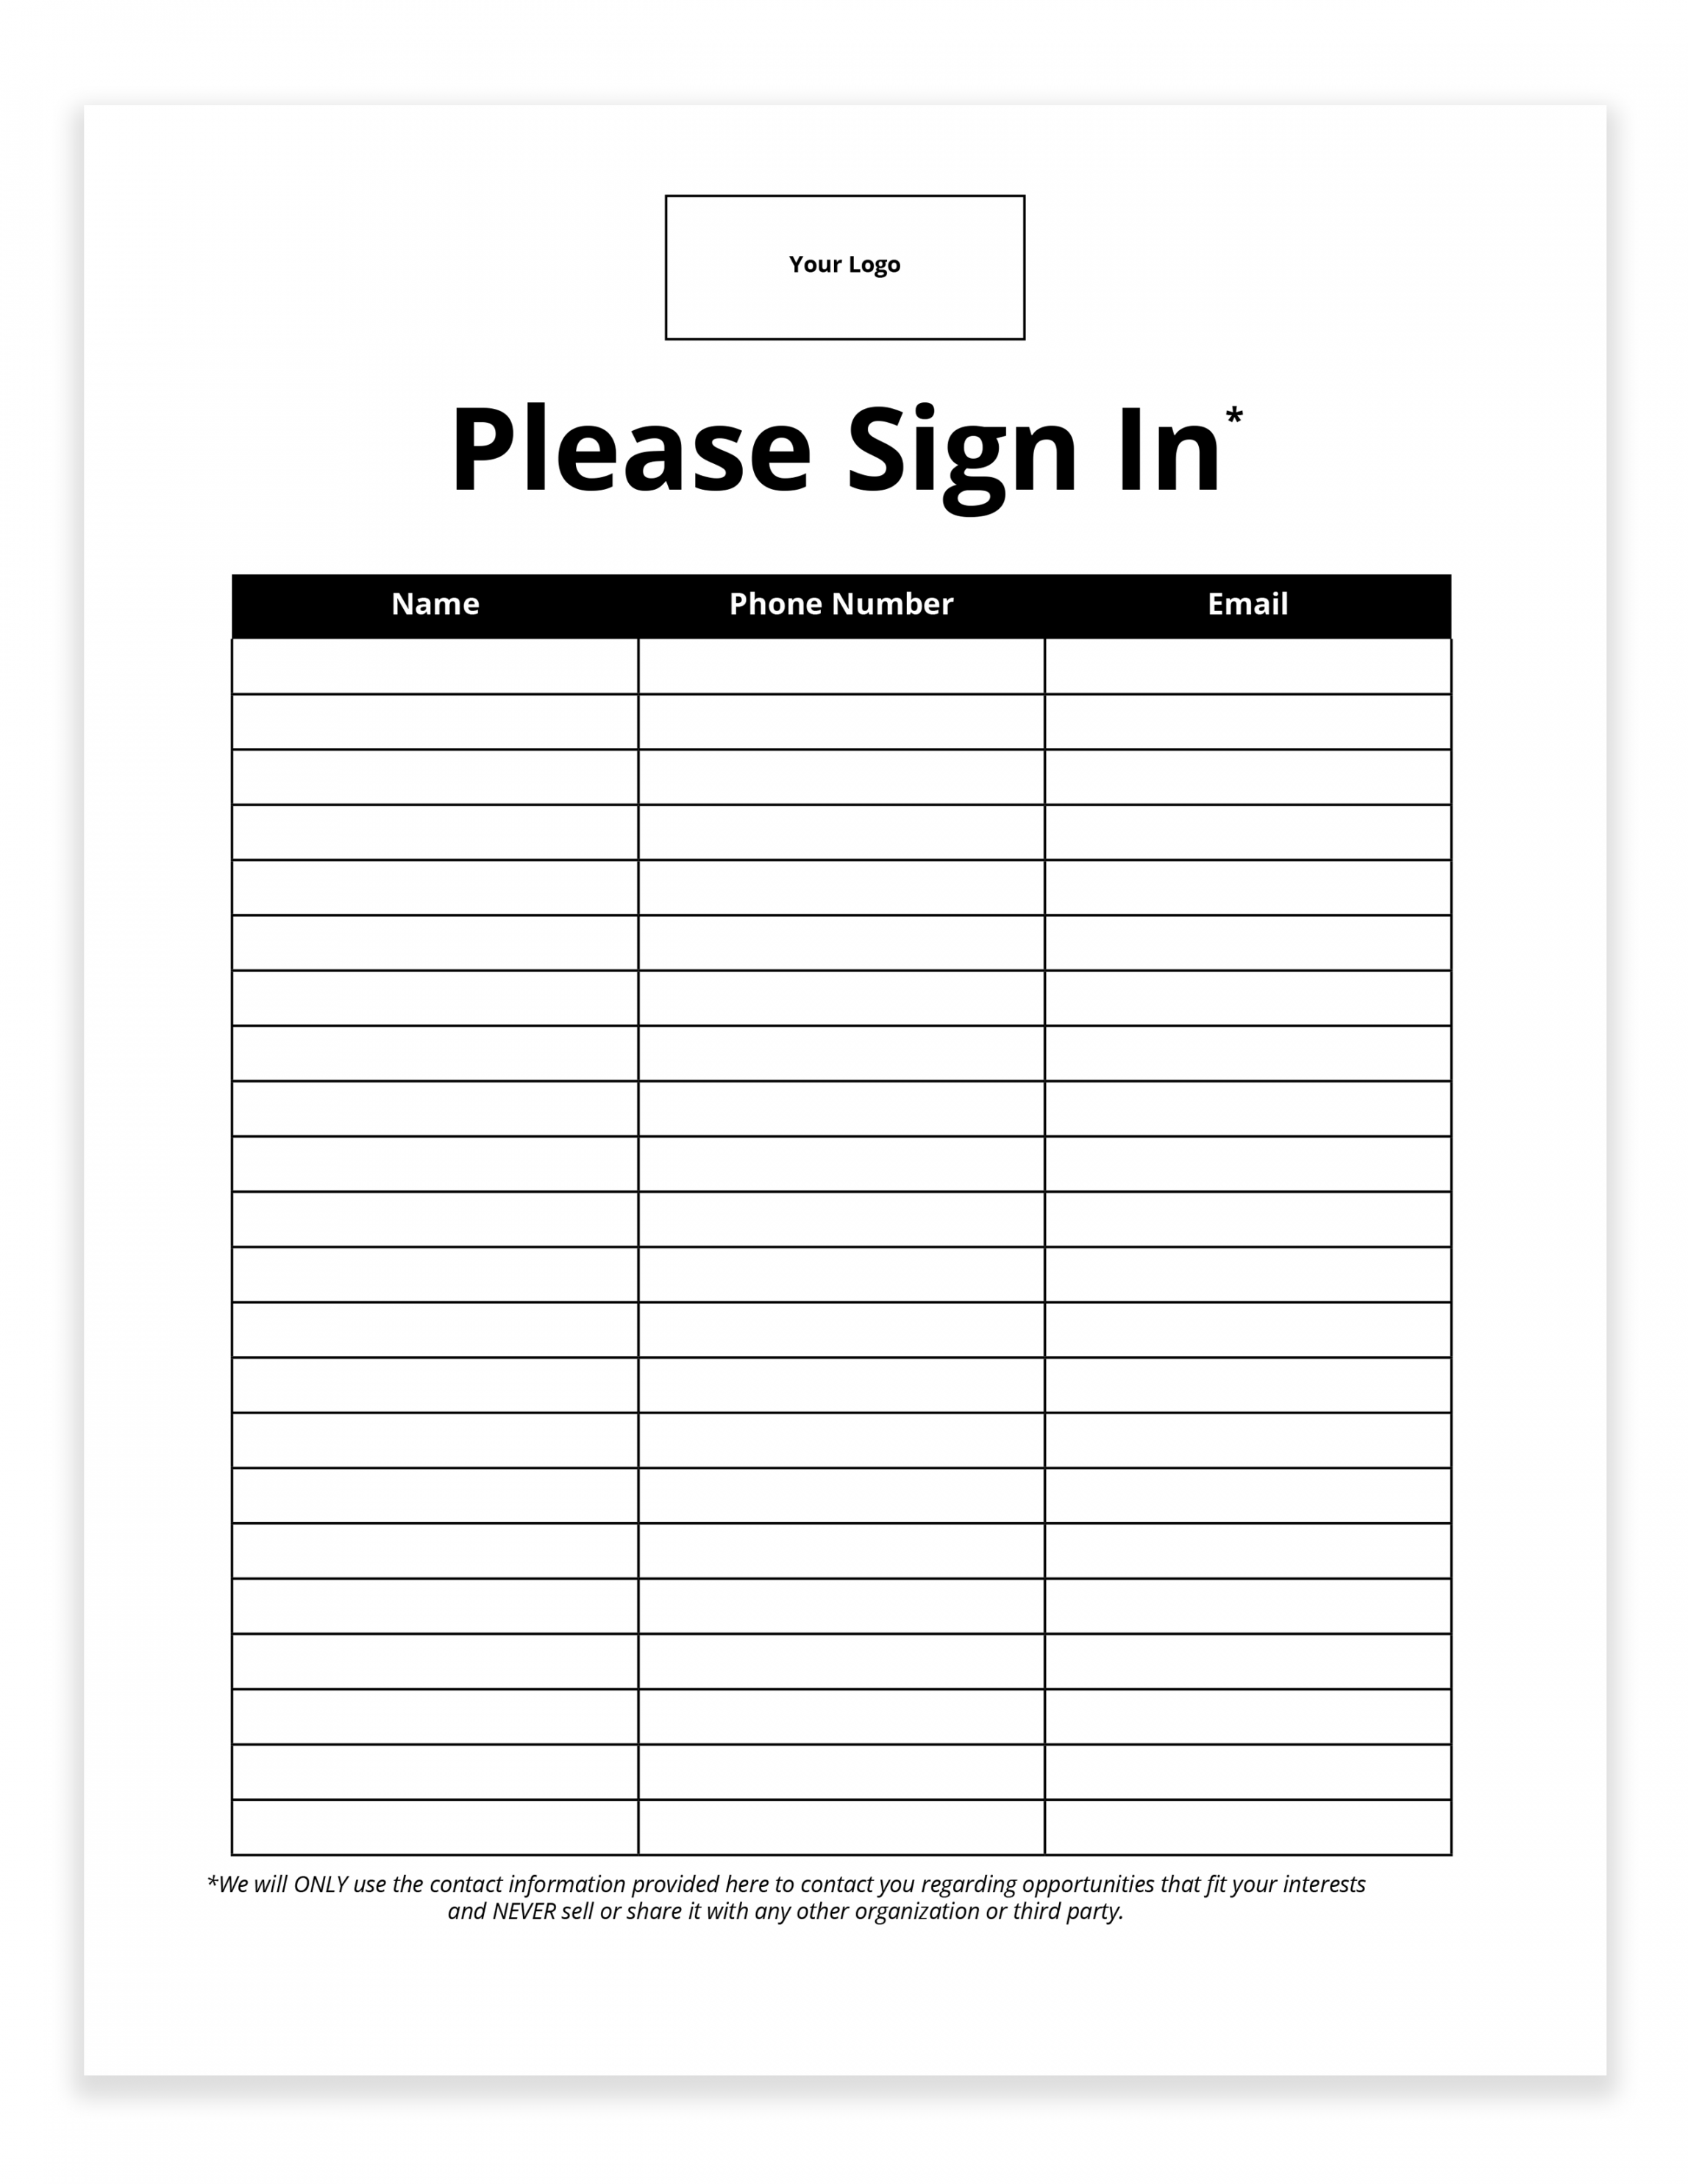 Free Printable Sign In Sheet - Printable - Downloadable Open House Sign-in Sheet Templates